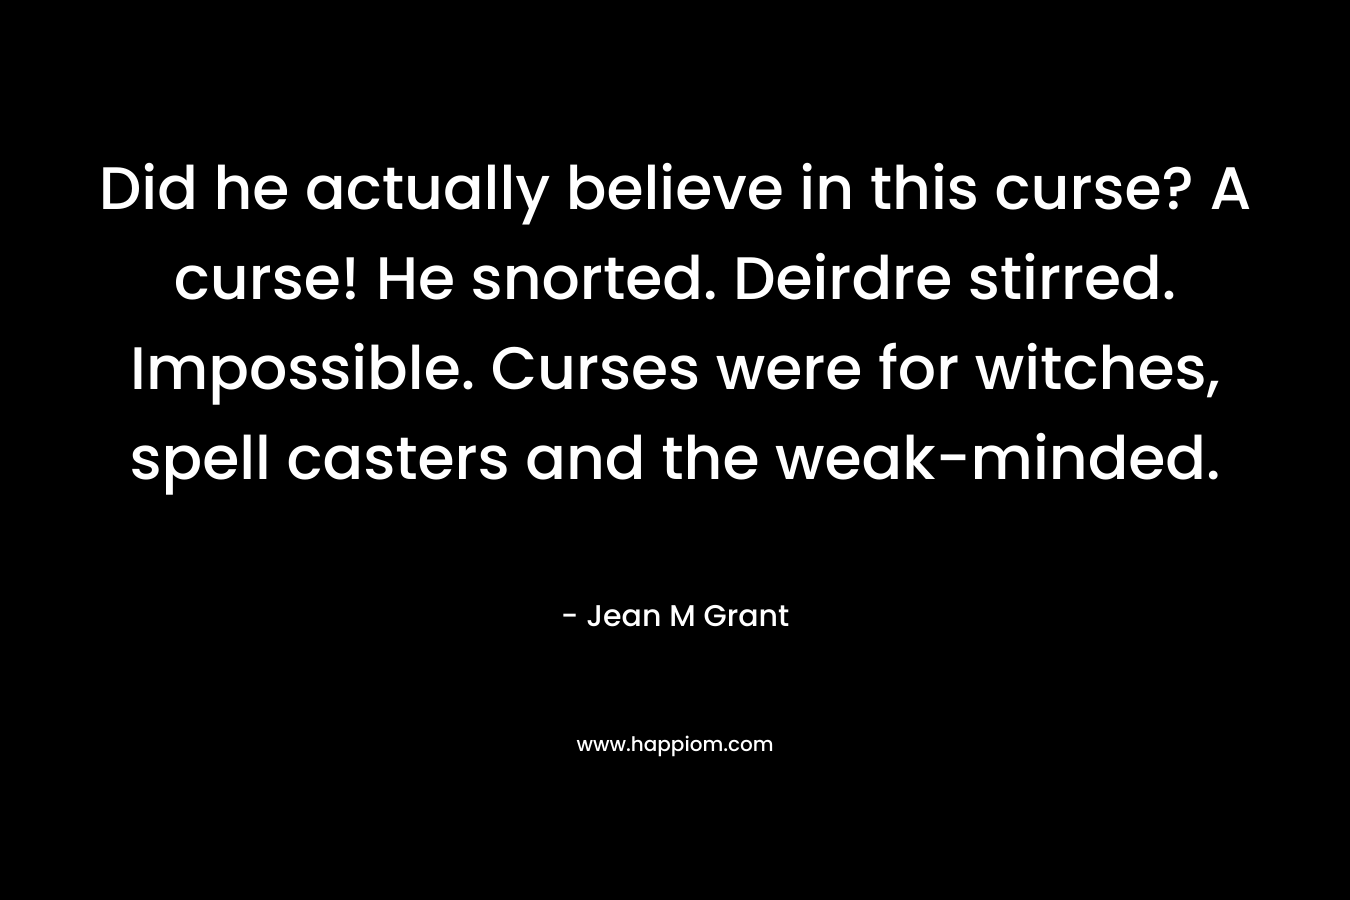 Did he actually believe in this curse? A curse! He snorted. Deirdre stirred.	Impossible. Curses were for witches, spell casters and the weak-minded. – Jean M Grant